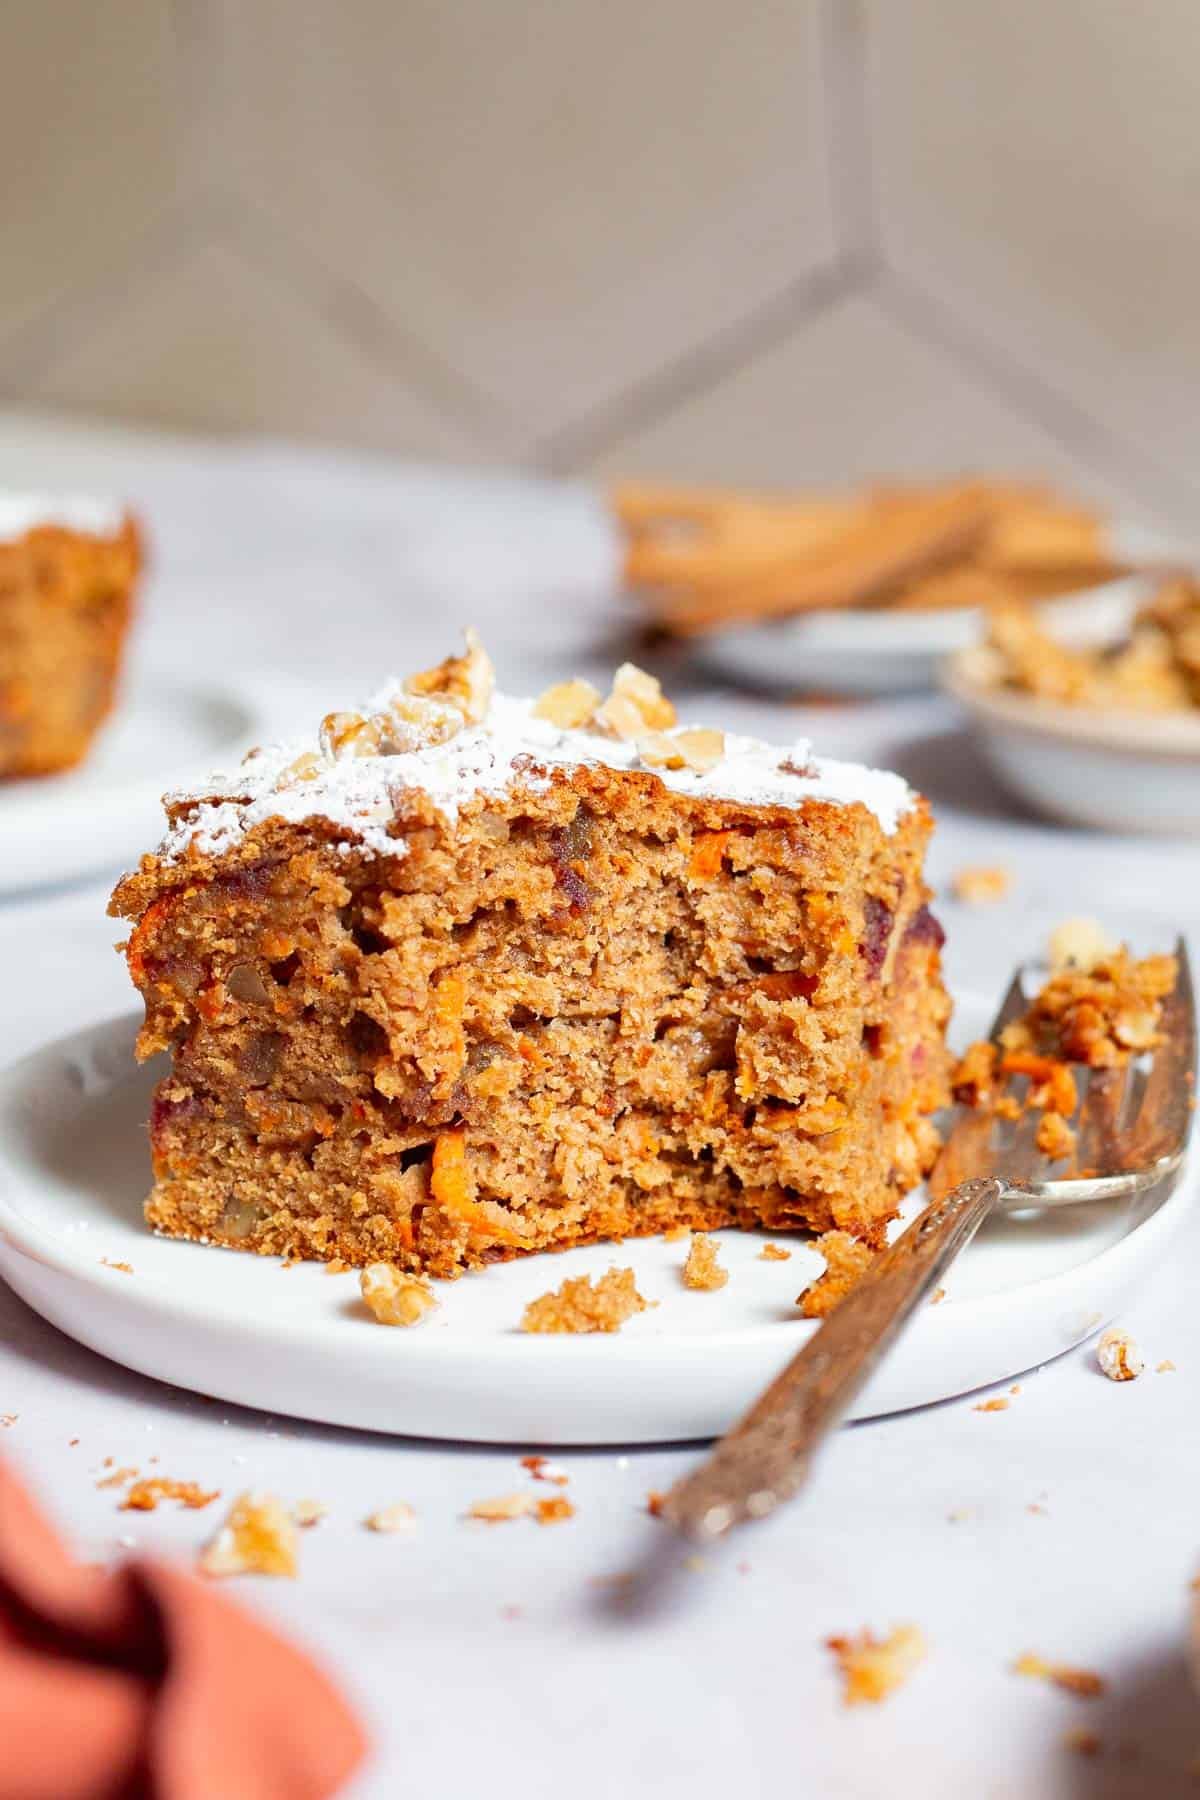 A close up of a slice of healthy carrot cake with a bite taken out of it on a plate with a fork.